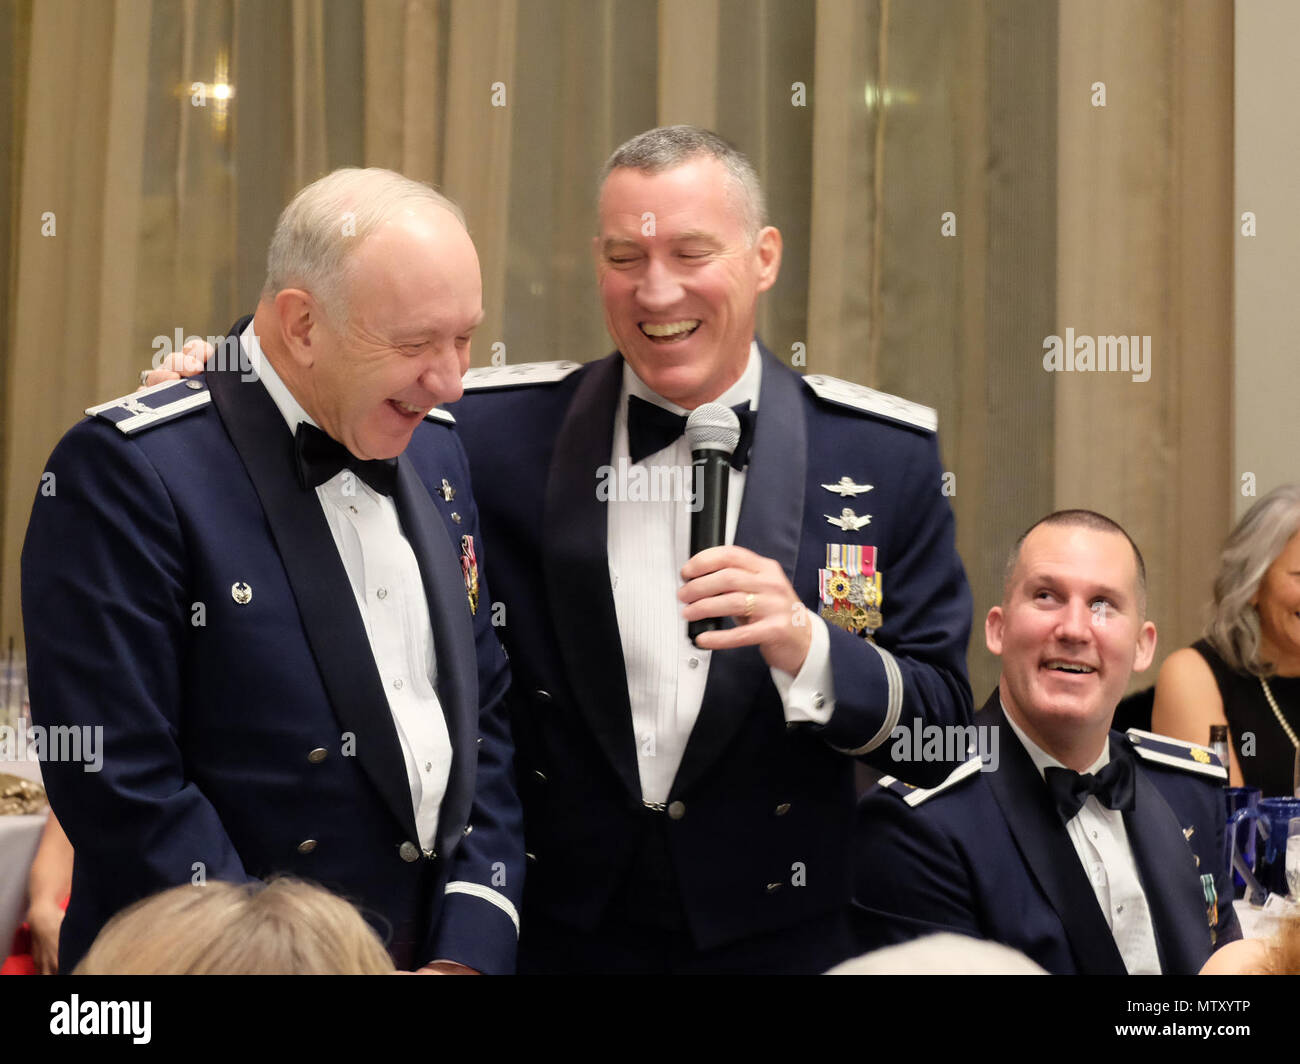 Retired Col. Jack Anthony, 1st Space Operations Squadron commander from July 1996 – July 1998, laughs with Maj. Gen. Burke E. Wilson, Deputy Principal Cyber Advisor to the Secretary of Defense and Senior Military Advisor for Cyber, Office of the Under Secretary of Defense for Policy, Office of the Secretary of Defense, the Pentagon, Washington, D.C. during the squadron’s 25th anniversary celebration at The Mining Exchange, in Colorado Springs, Colorado, Friday, Jan. 27, 2017. Wilson was the 1 SOPS commander from July 2002 – July 2003. The former commanders recalled their prior service together Stock Photo